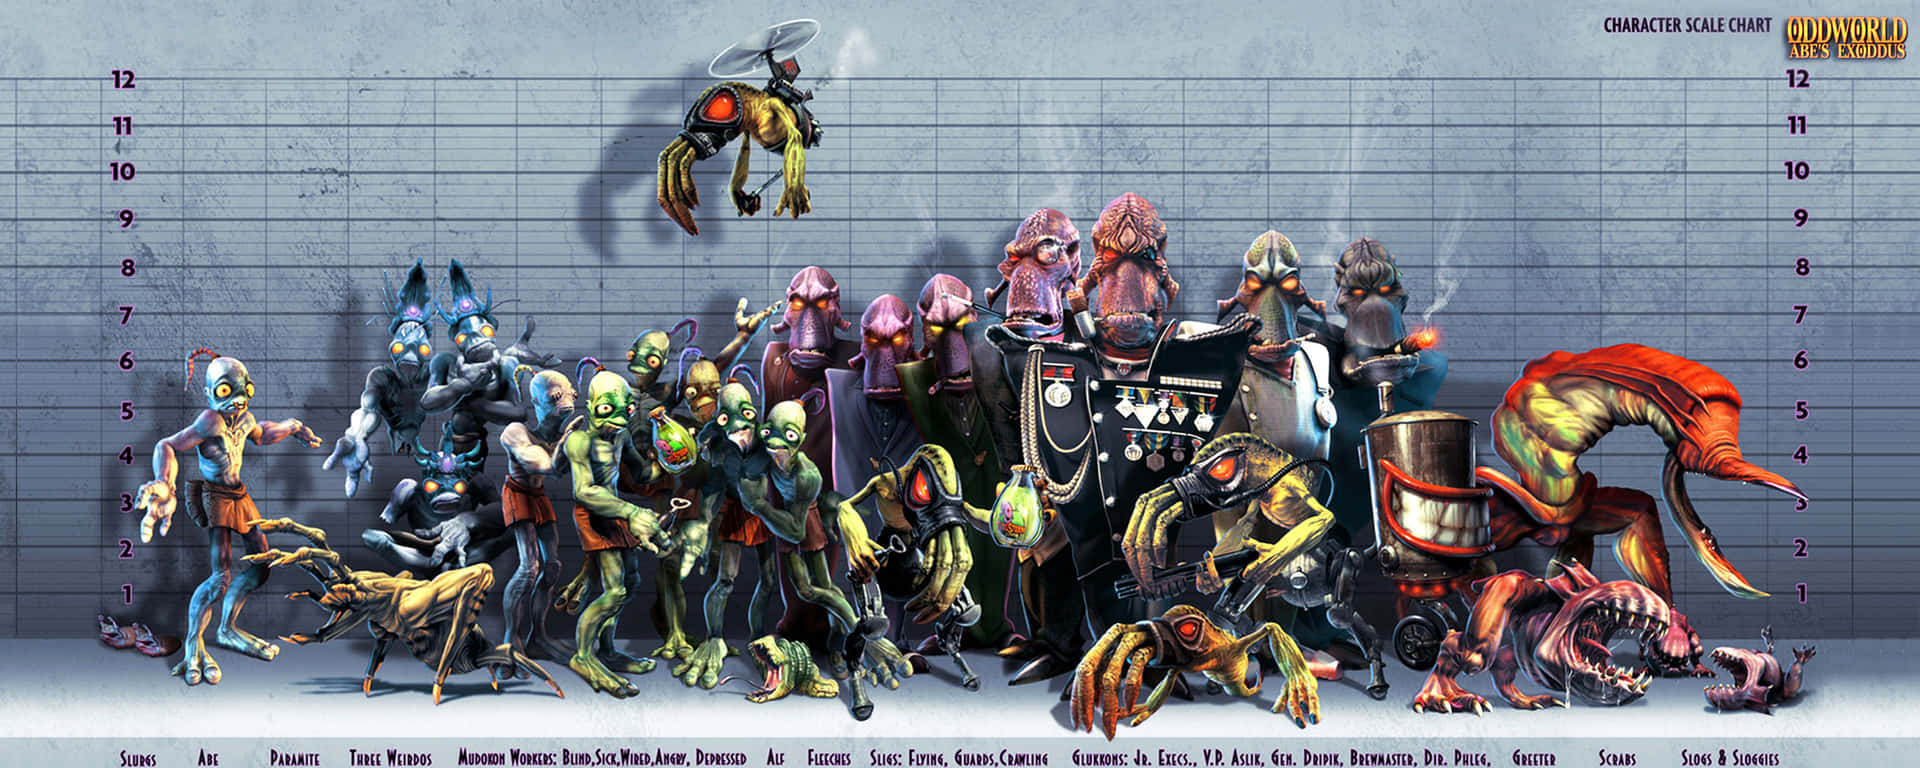 Dual Monitor Anime Oddworld Video Game Characters Wallpaper